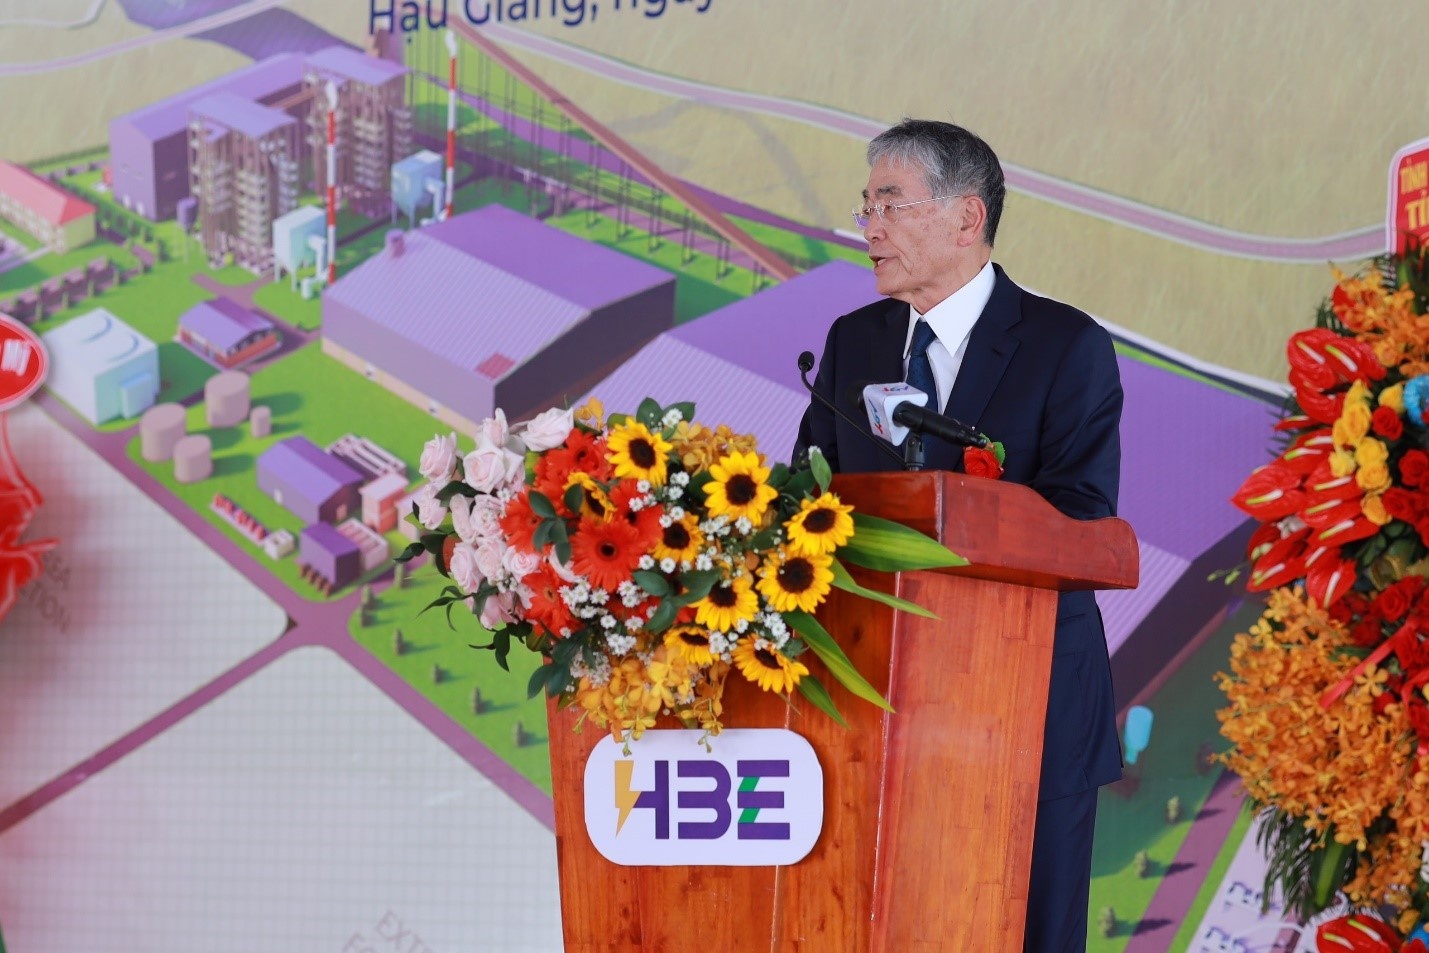 Hau Giang Biomass Power Plant: potential from trusted partners